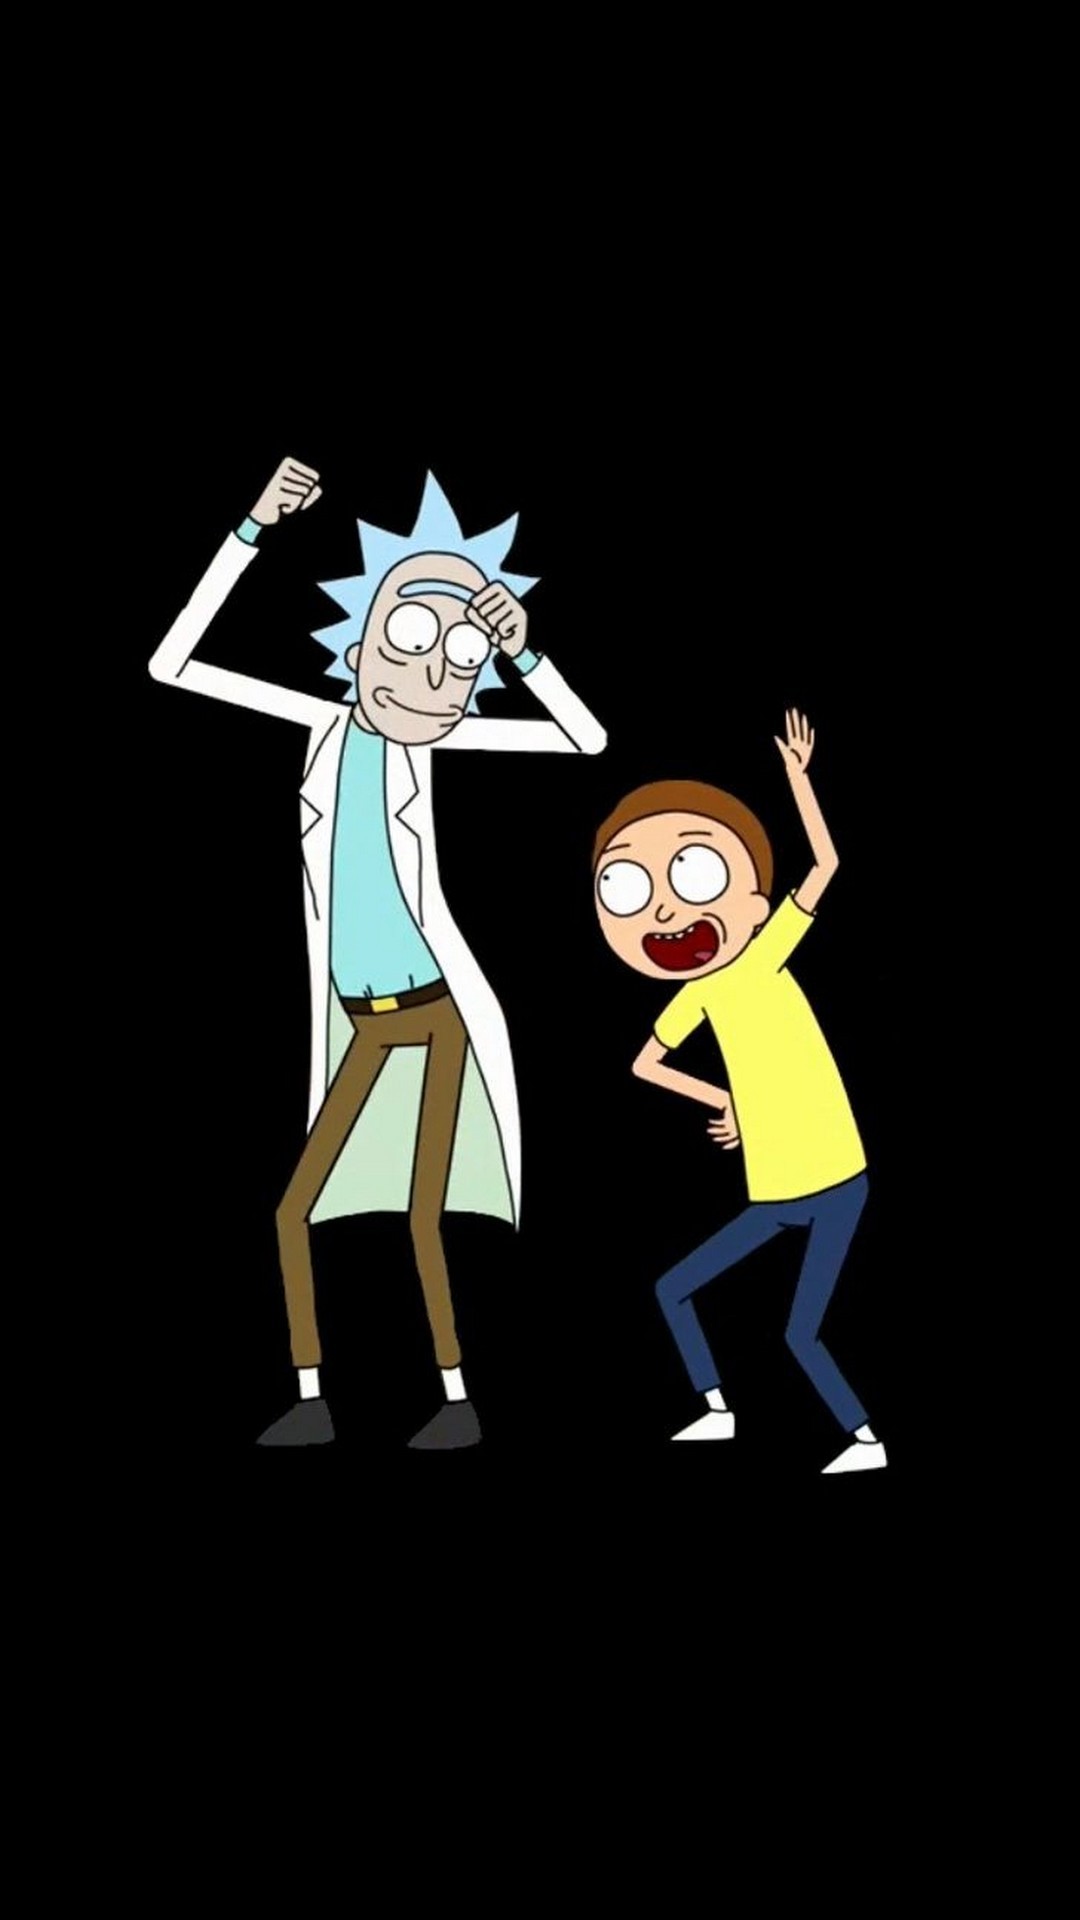 Wallpaper Rick and Morty iPhone with image resolution 1080x1920 pixel. You can use this wallpaper as background for your desktop Computer Screensavers, Android or iPhone smartphones